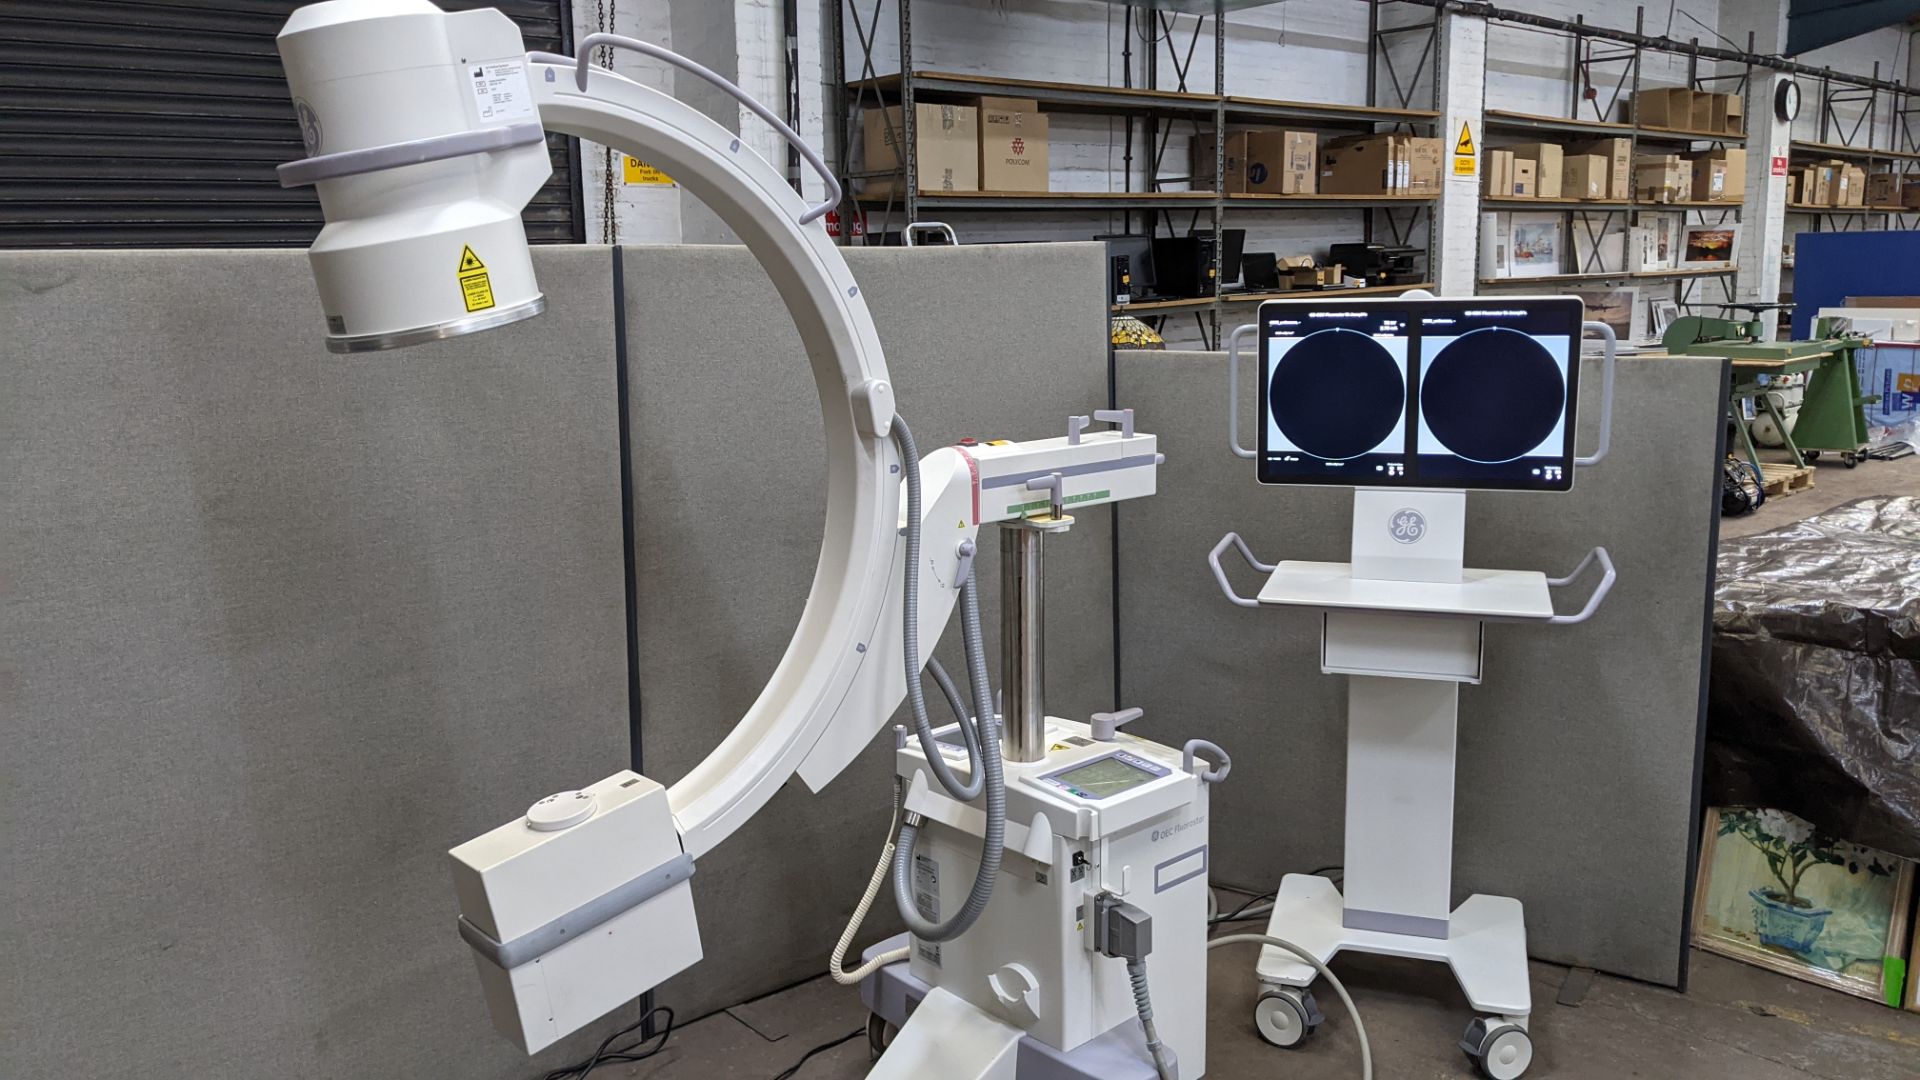 GE-OEC Fluorostar imaging system, purchased new in August 2017. EO4 Series. - Image 59 of 68